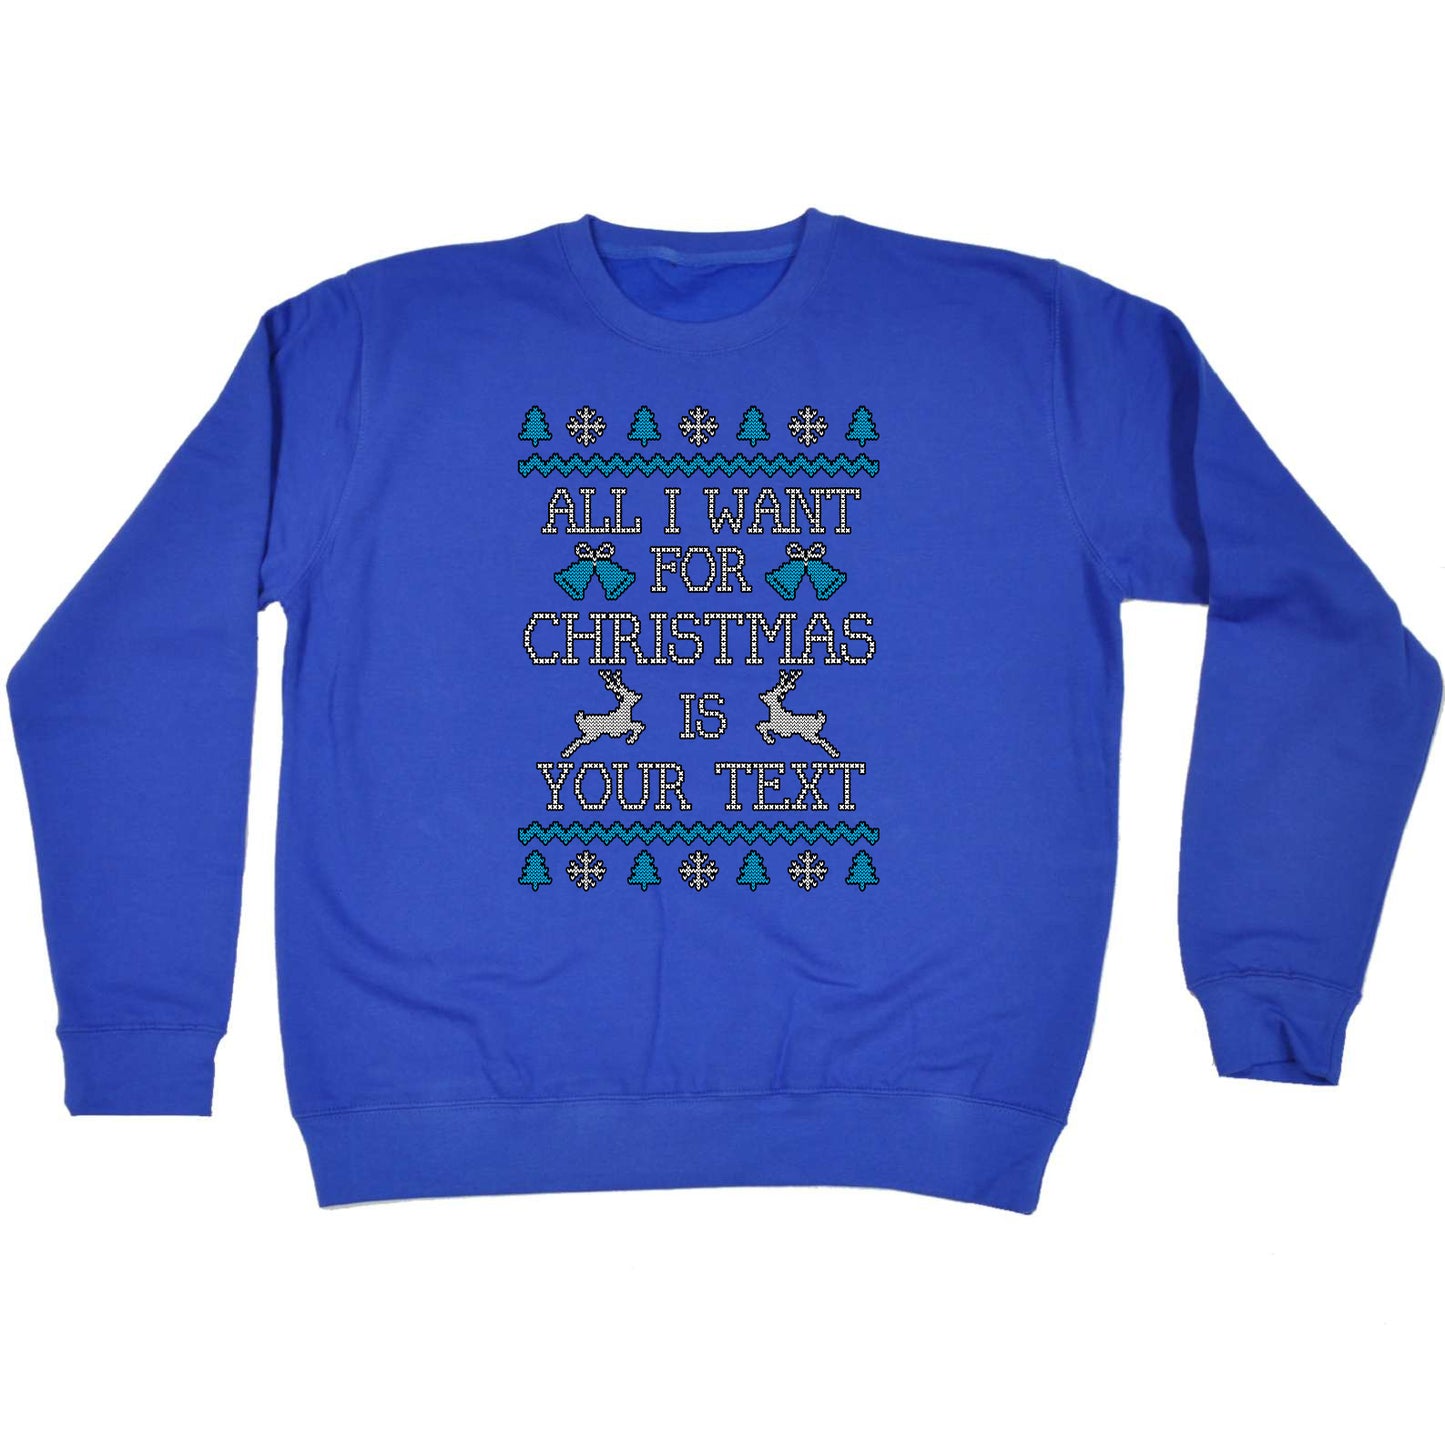 All I Want For Christmas Is Personalised - Funny Novelty Sweatshirt